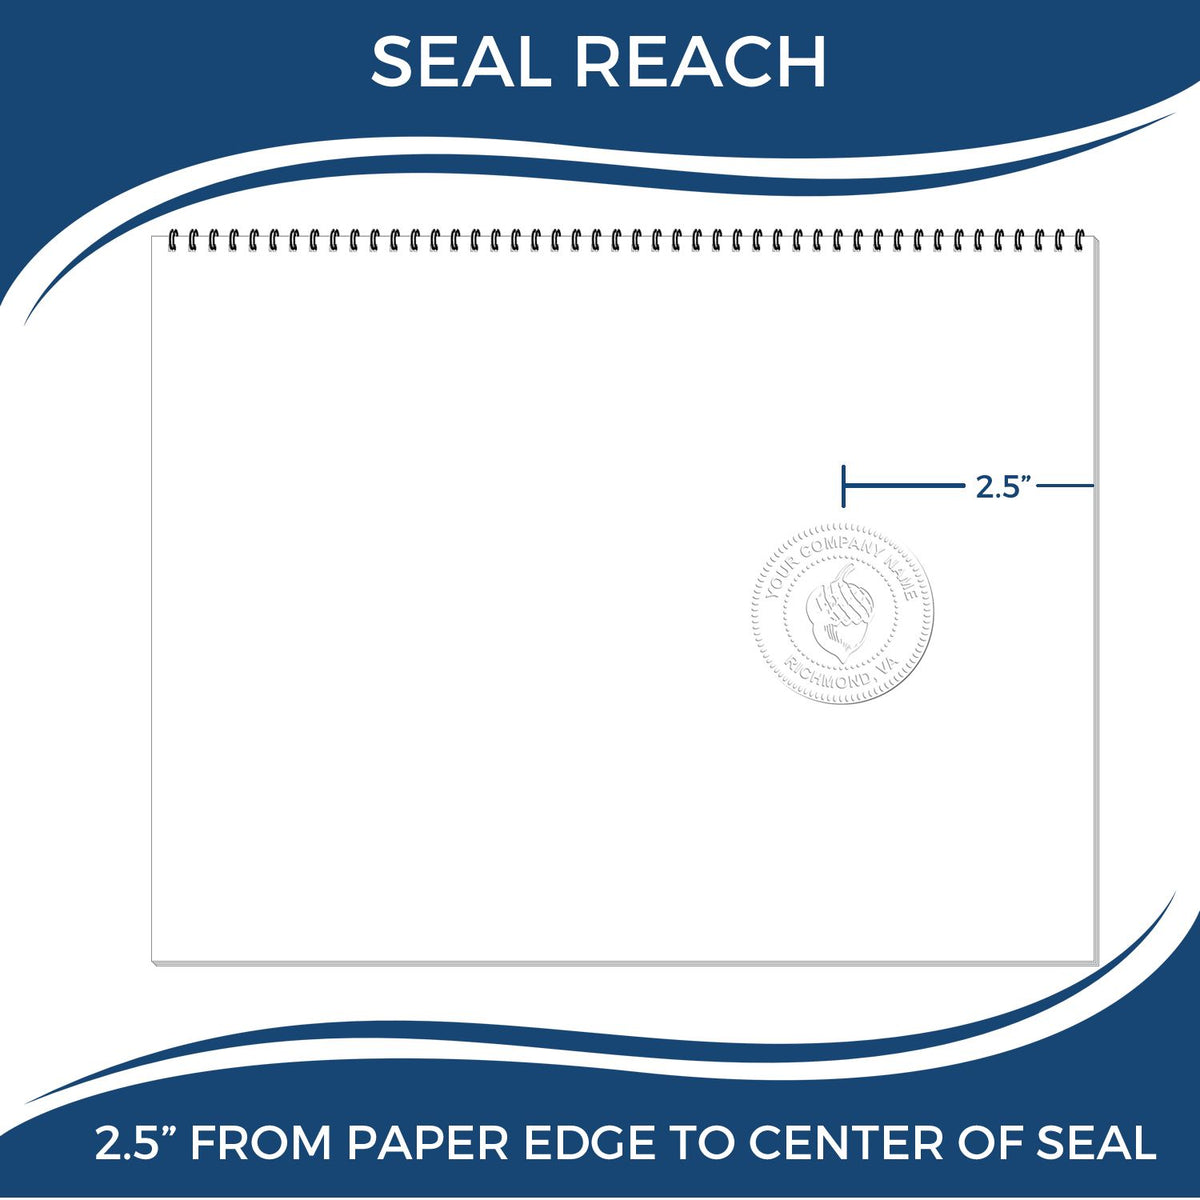 An infographic showing the seal reach which is represented by a ruler and a miniature seal image of the Long Reach Michigan PE Seal